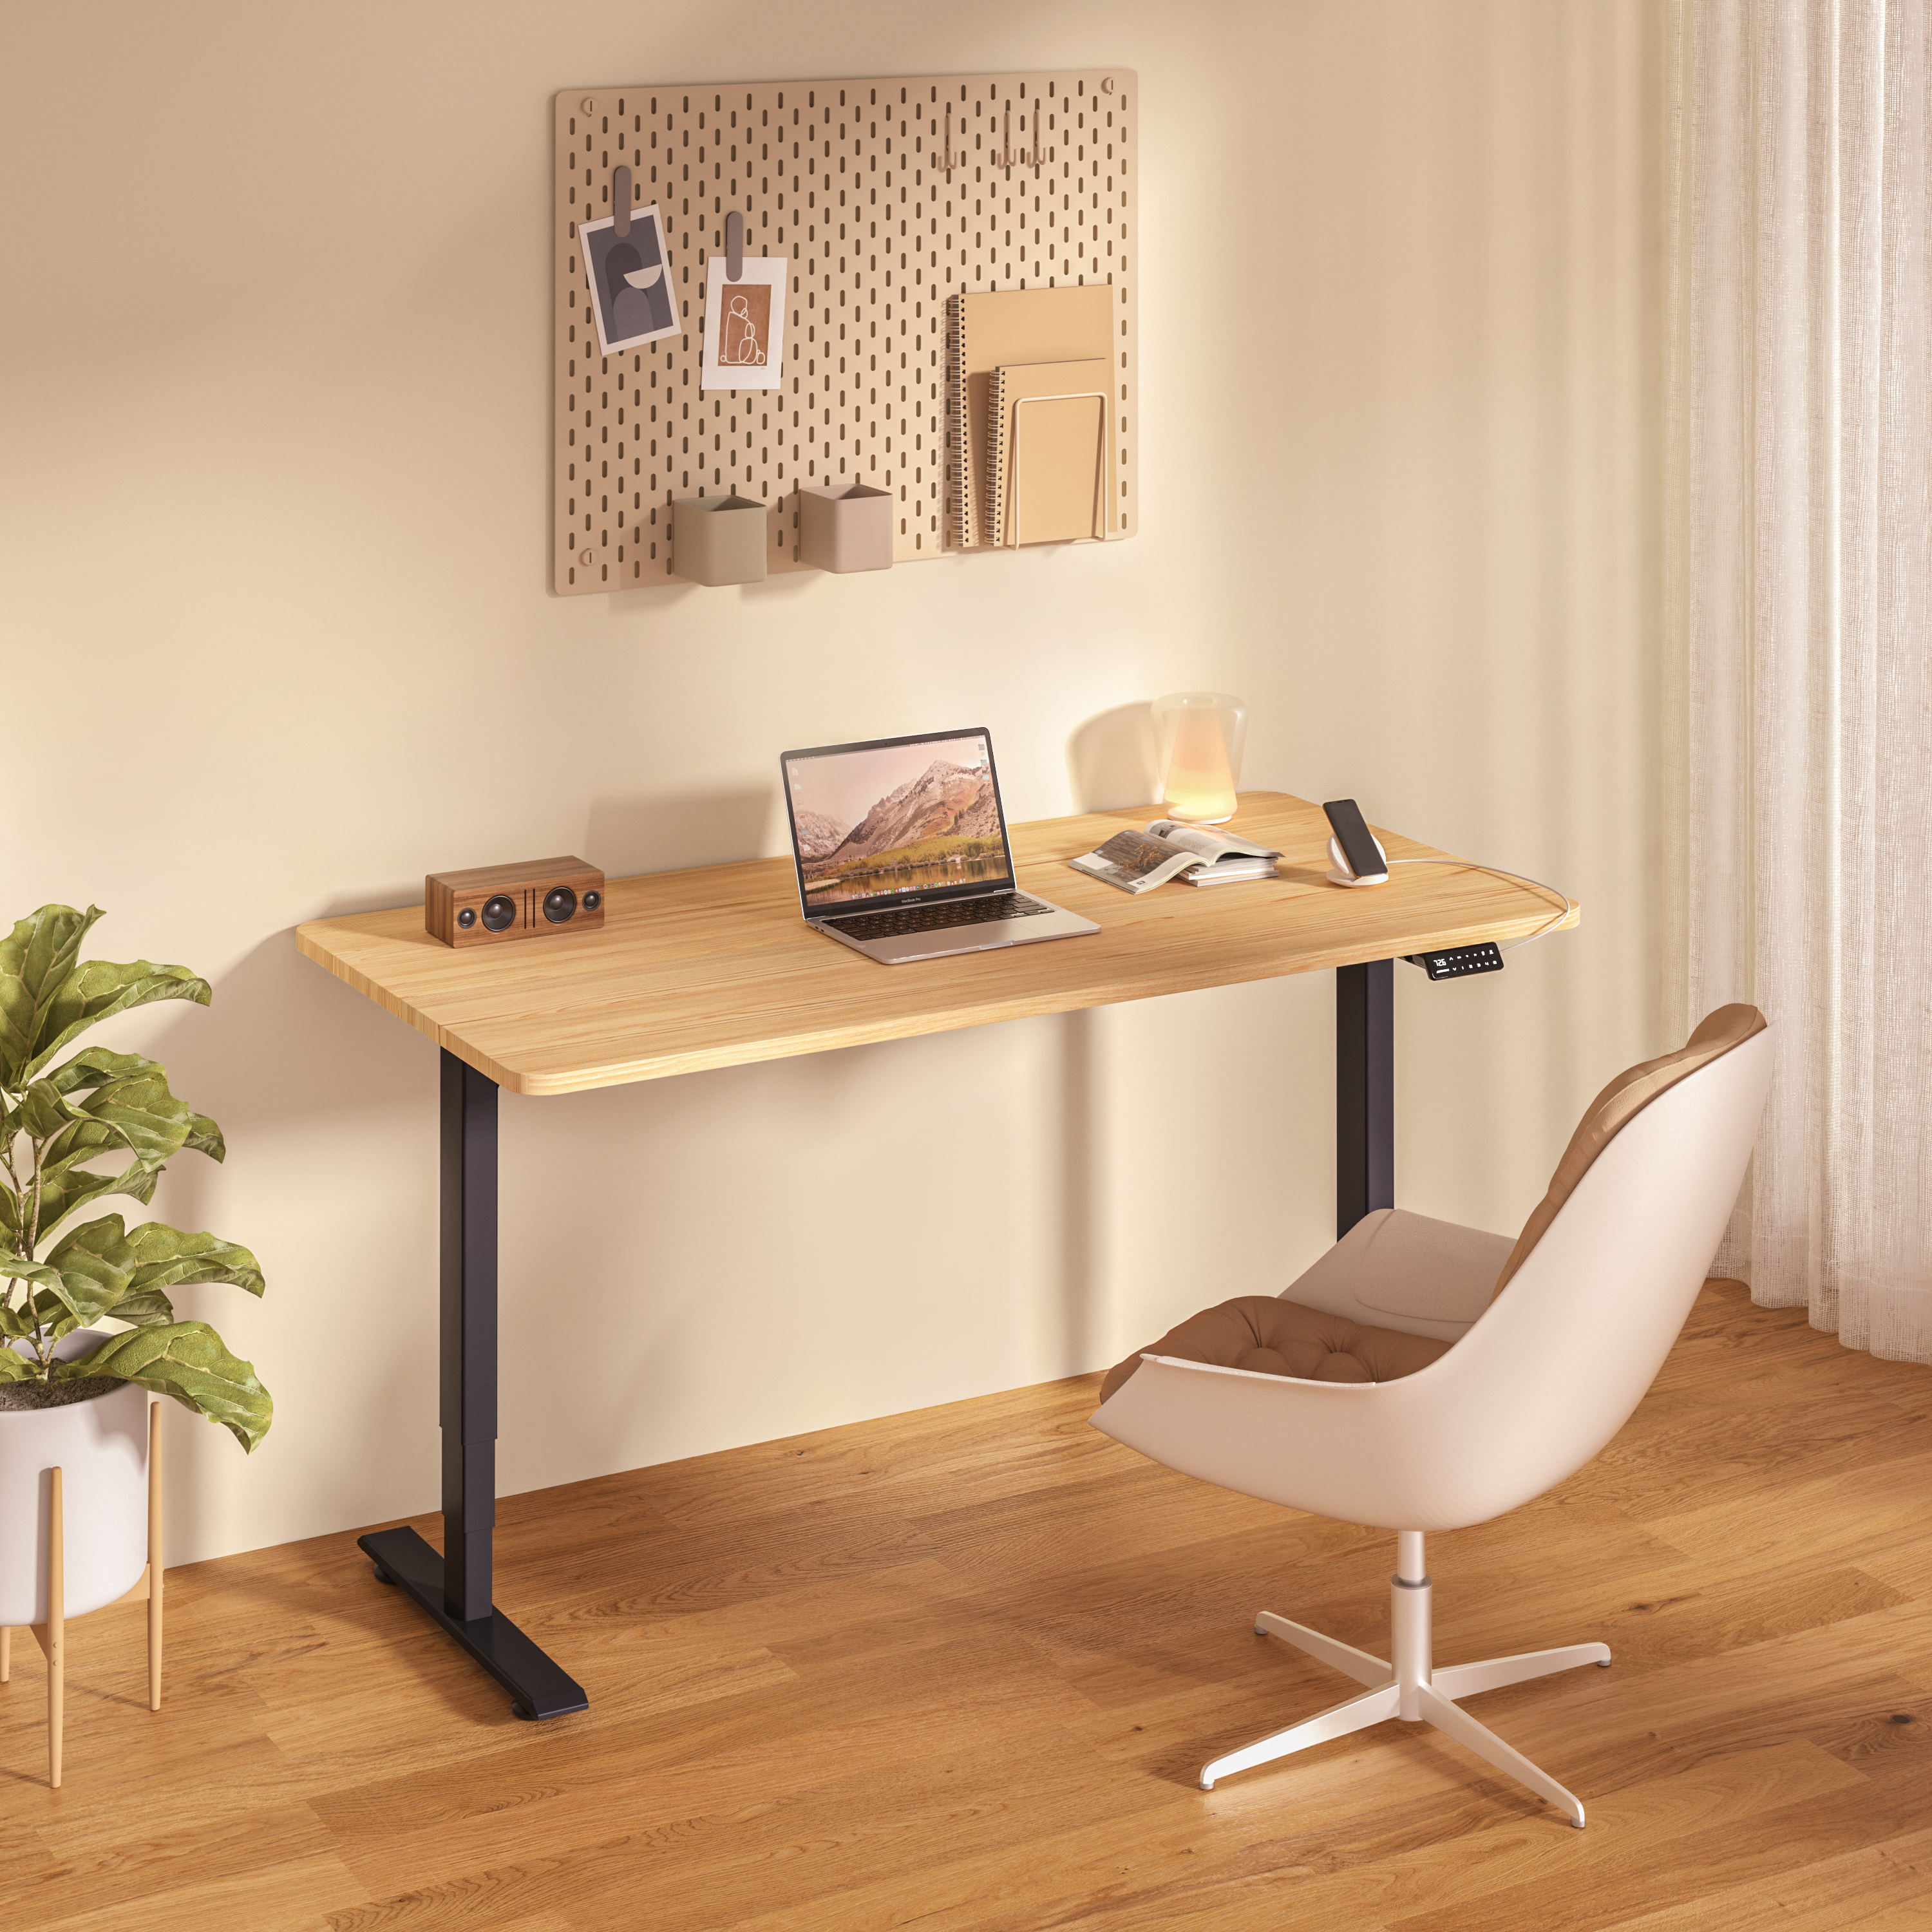 Maidesite electric standing desk suitable for study and home office work